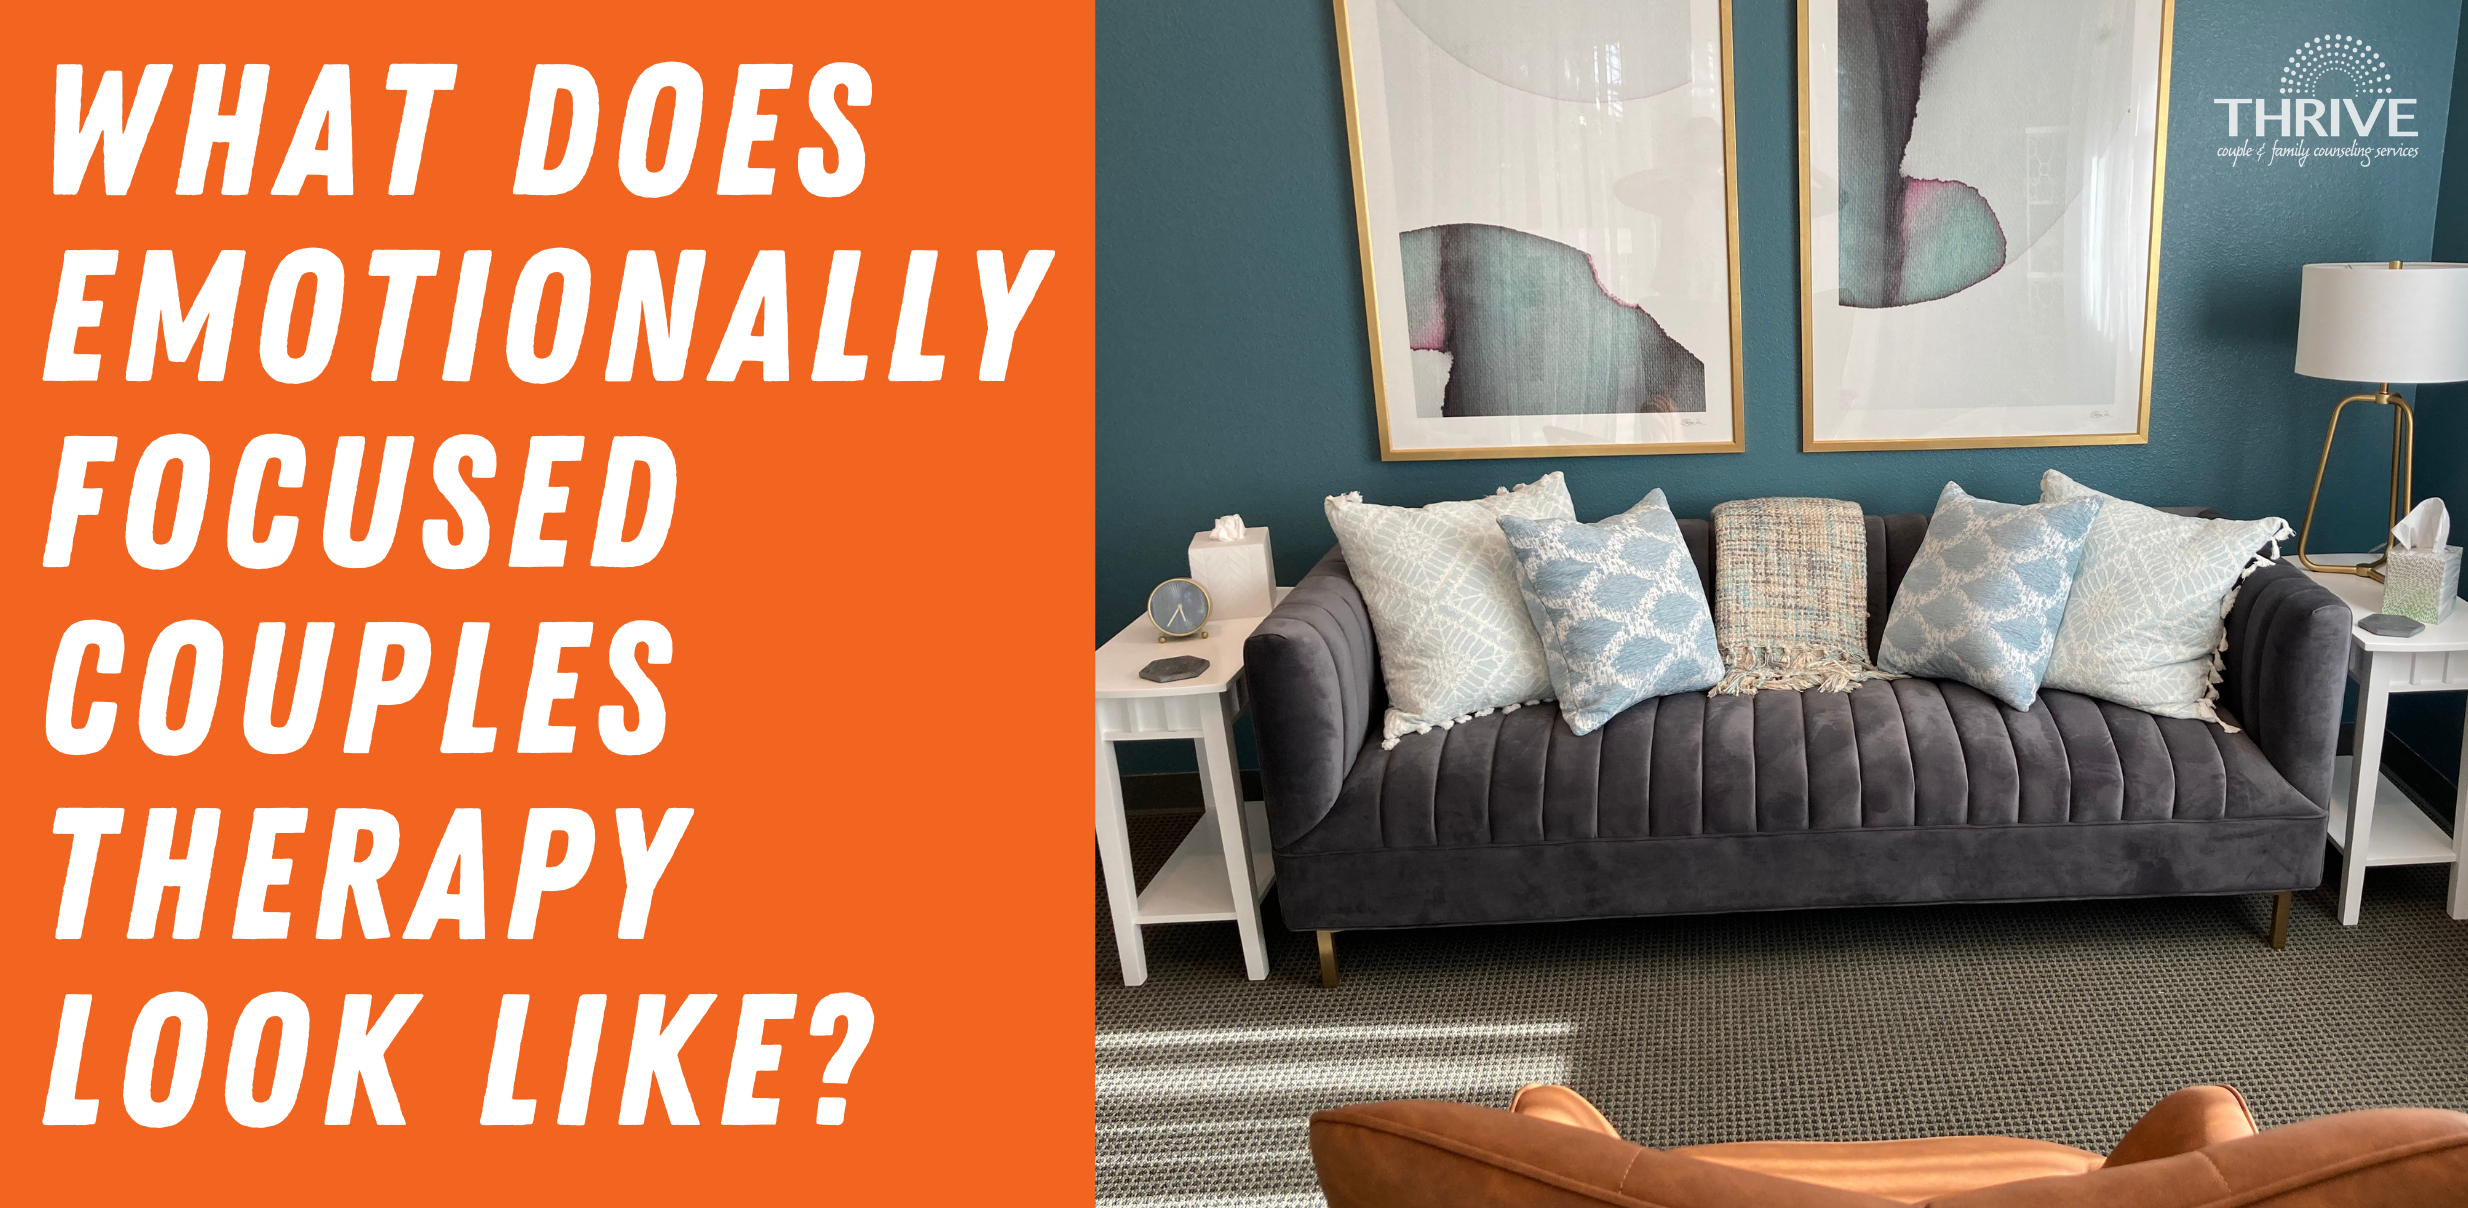 A graphic that reads "What does Emotionally Focused Couples Therapy Look Like? To the left of a photo of the Thrive Family Services offices, showing a gray couch in a turquoise colored room in Centennial, Colorado.